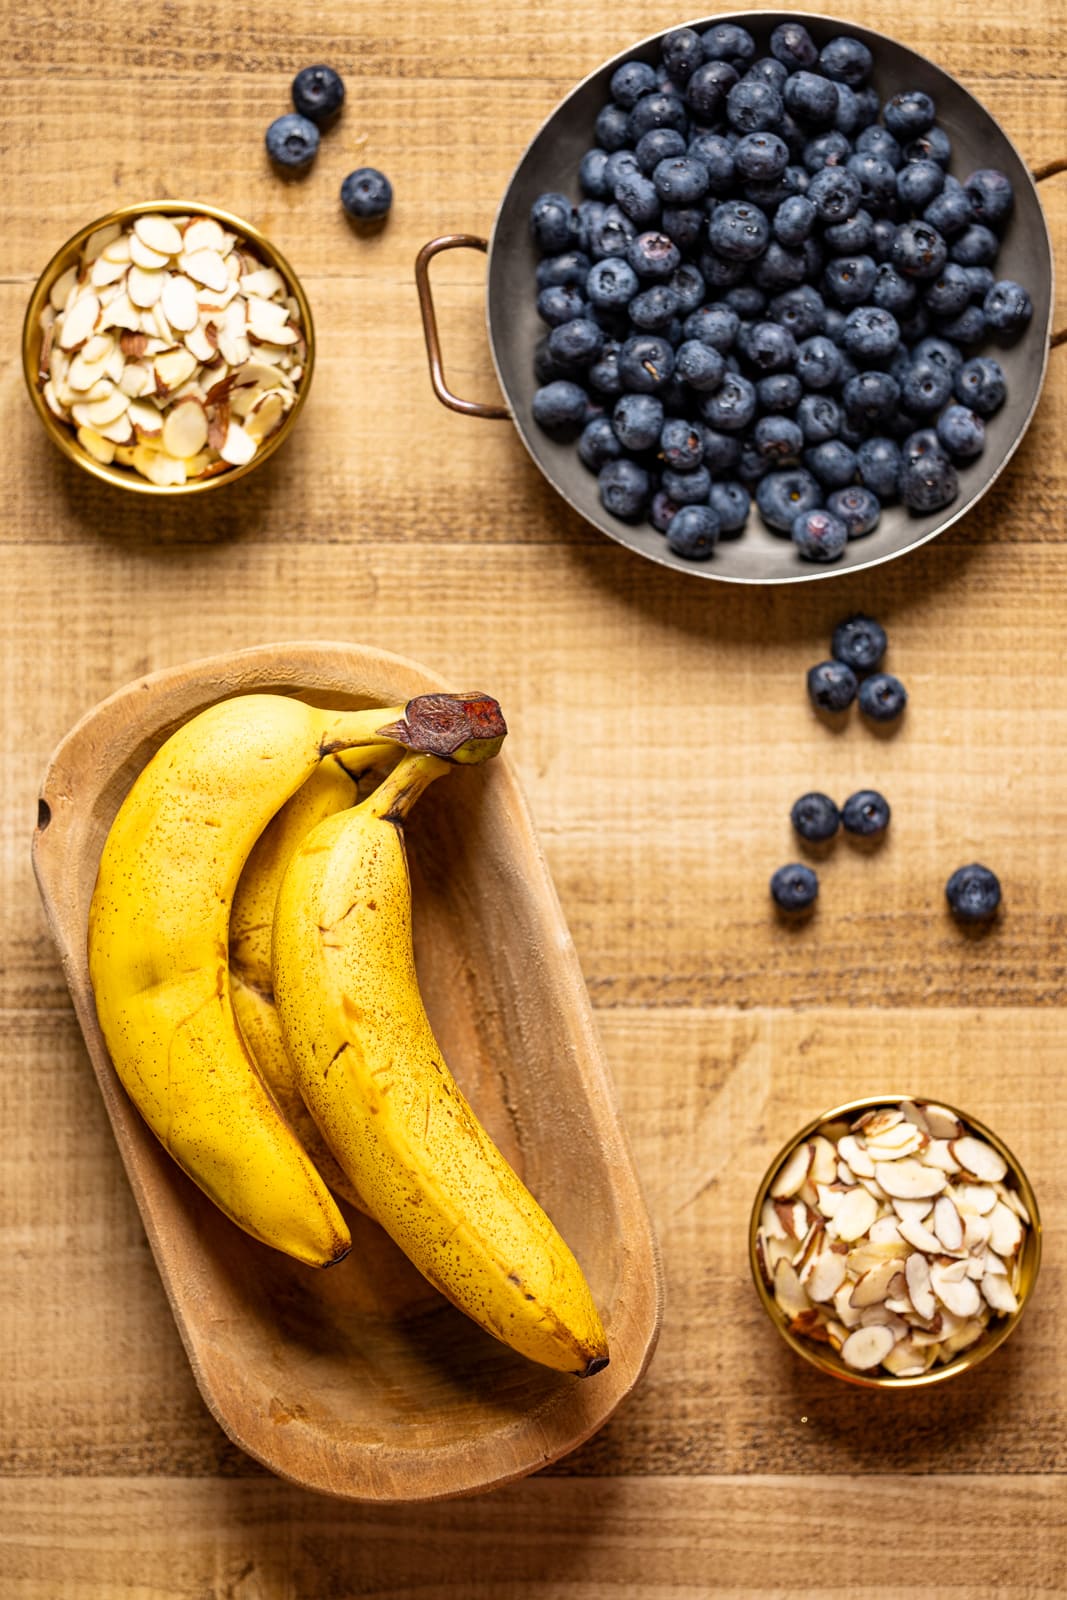 Bananas, blueberries, and almond slices on a brown wood table.